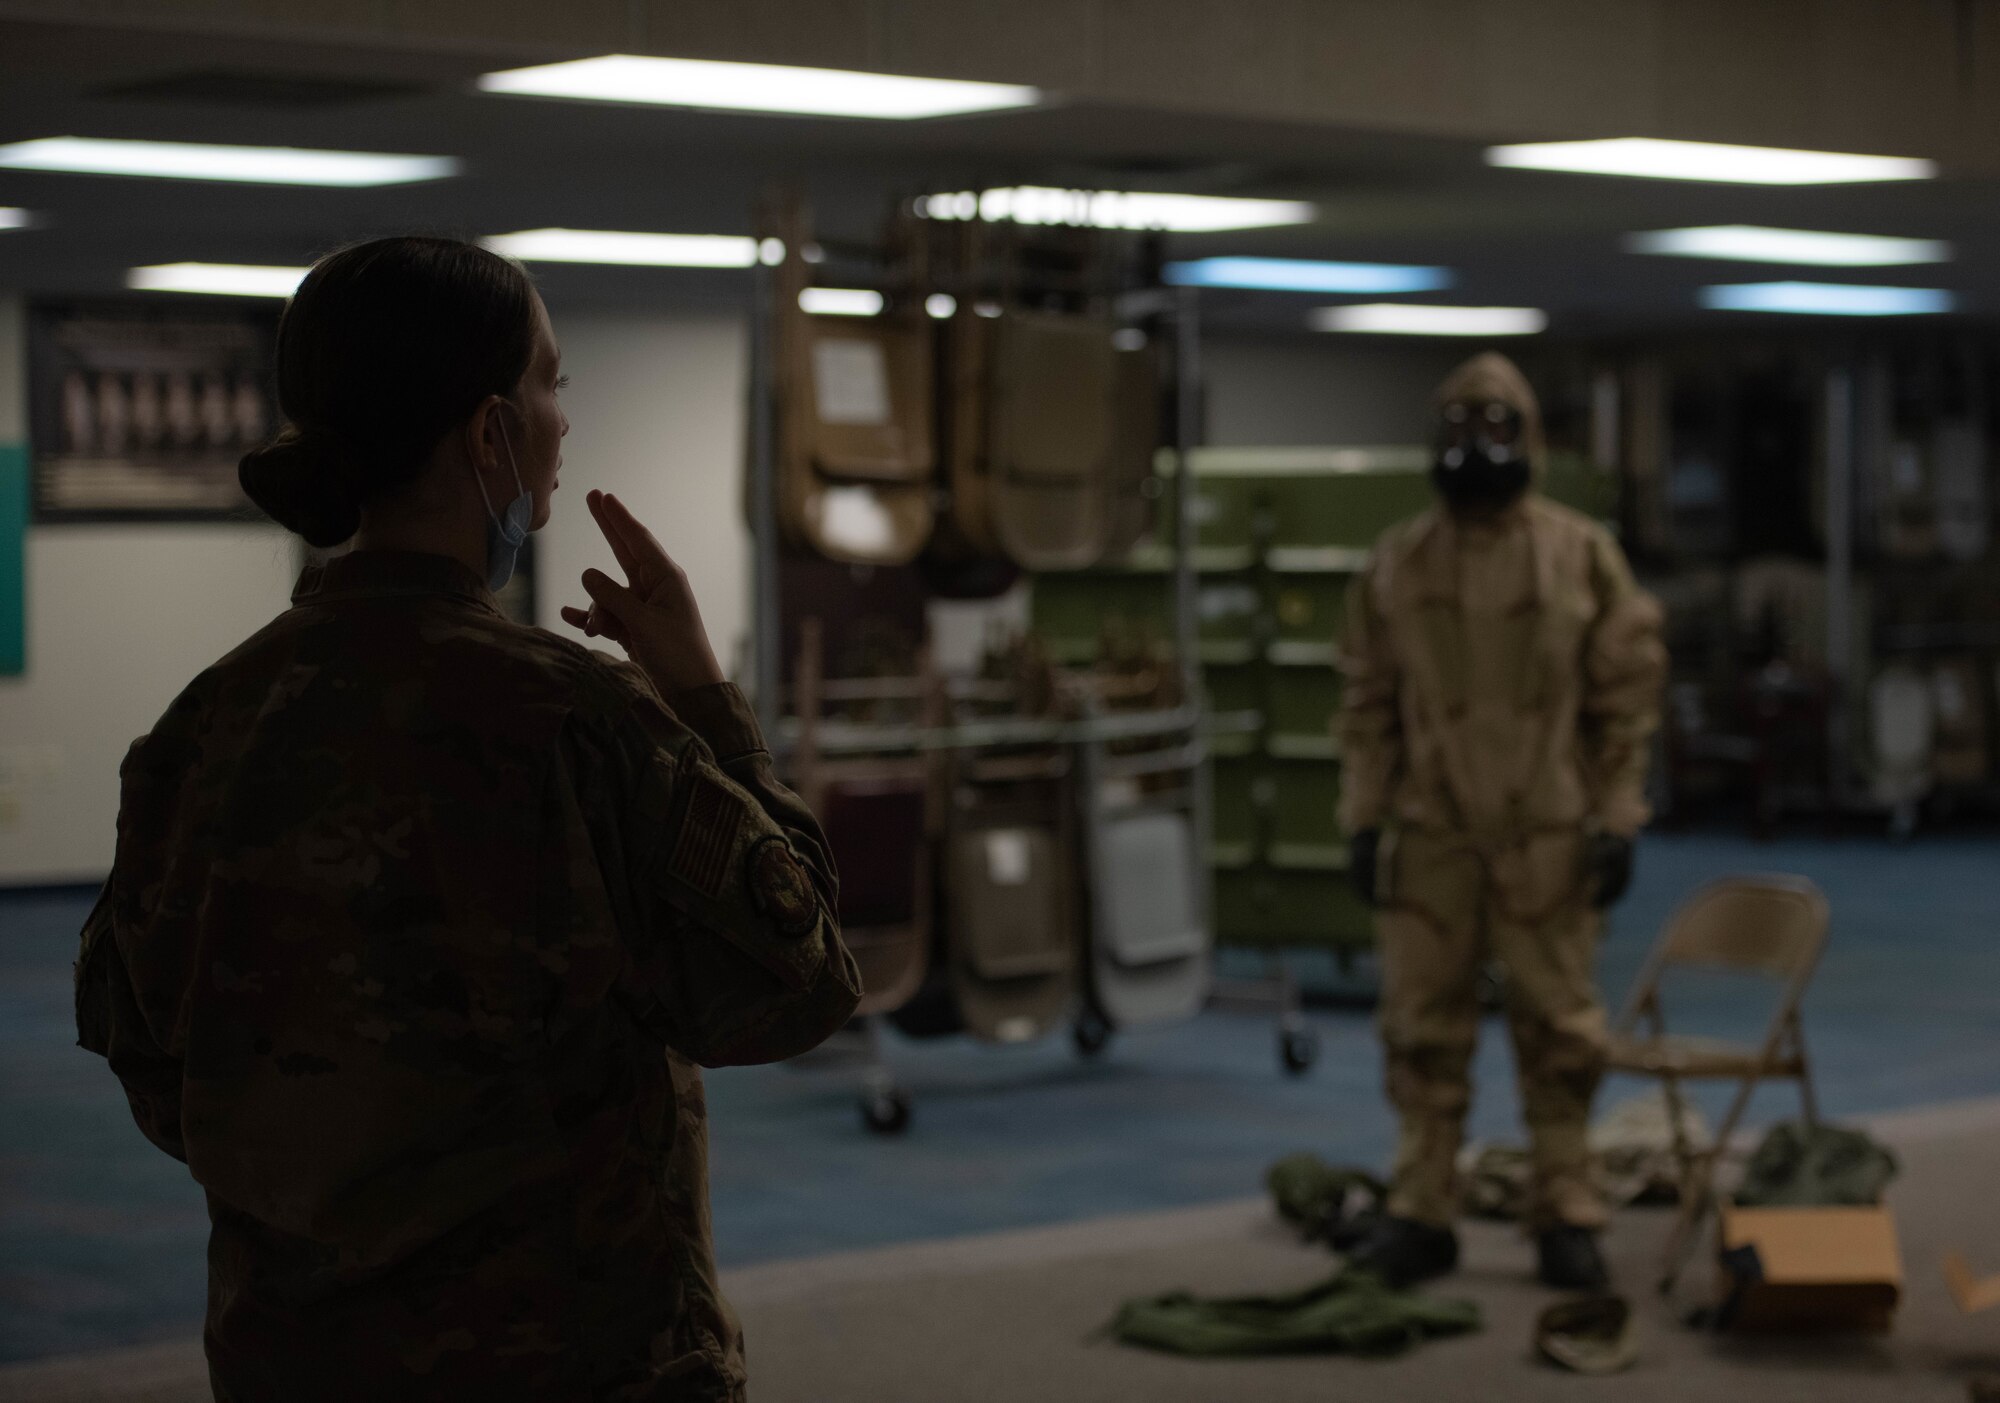 Airman instructs student in MOPP gear.